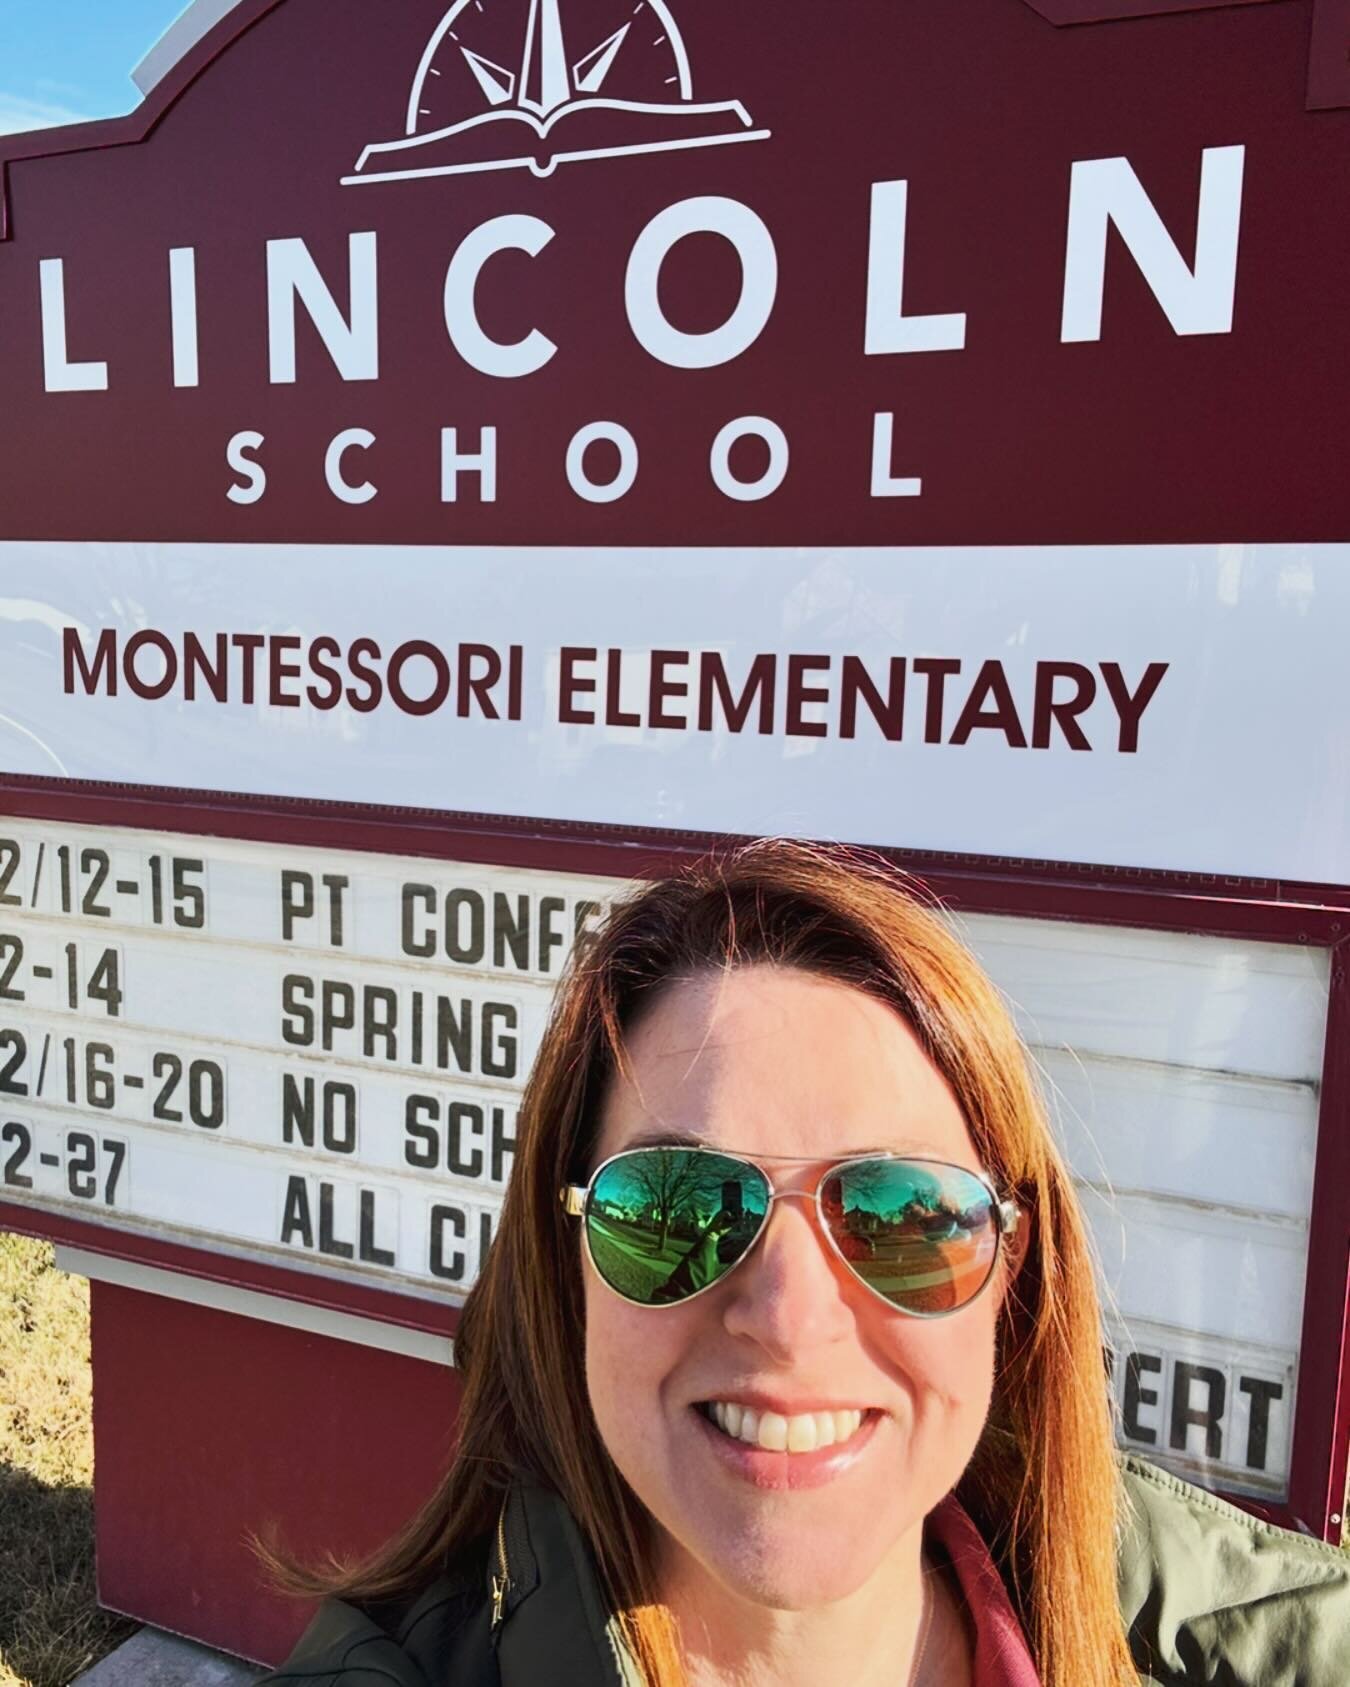 Spent this morning at Lincoln Montessori Elementary School. Thanks to Principle Angie Hausmann for showing me around and answering all my questions, and to the teachers and students for showing me the &ldquo;jobs&rdquo; (educational lessons) they wer